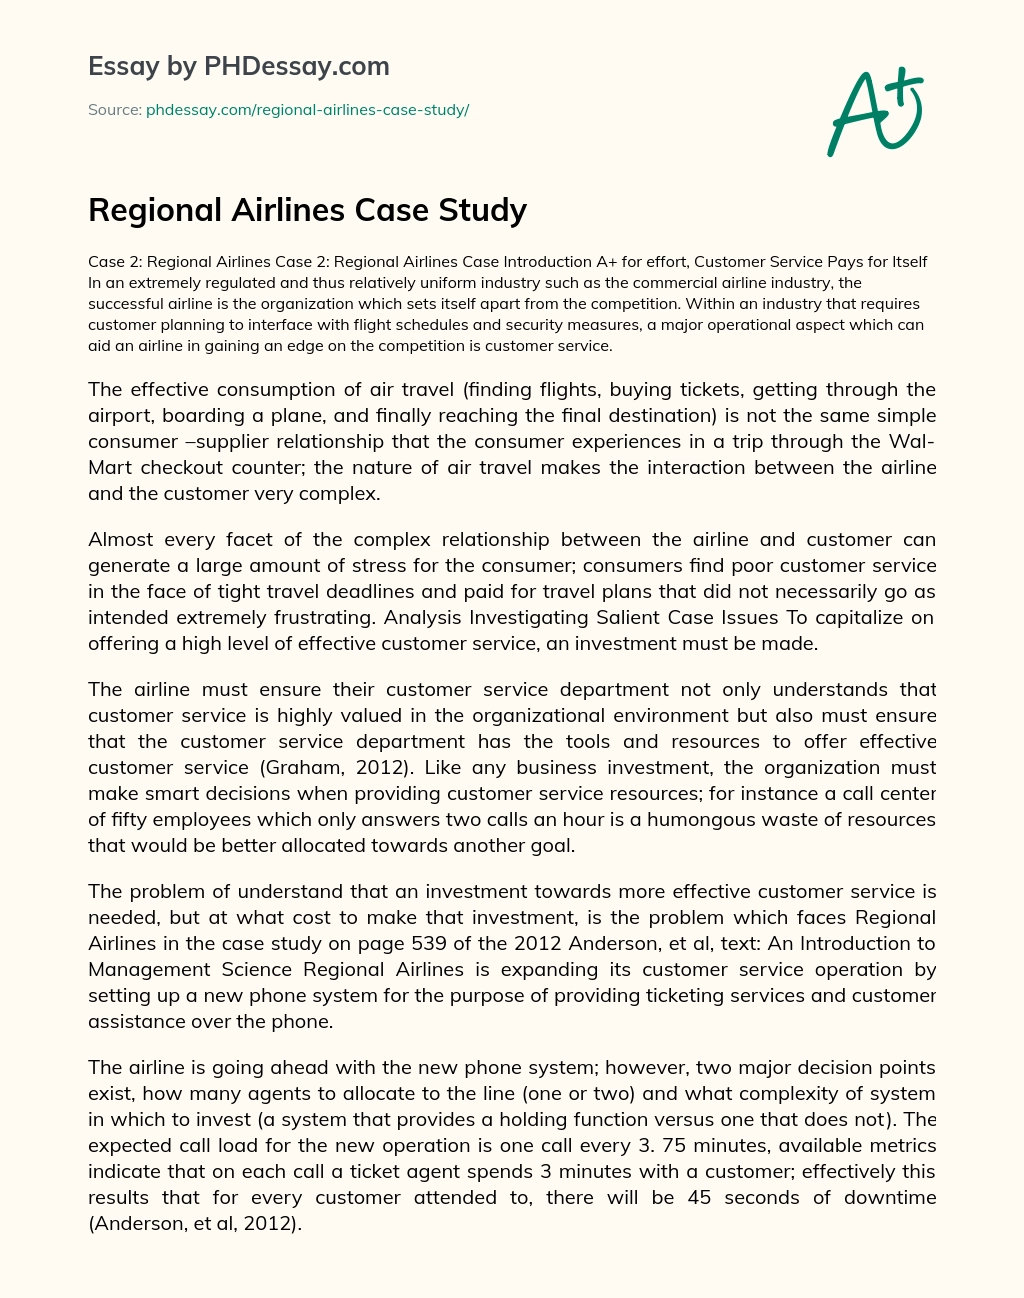 Regional Airlines Case Study essay